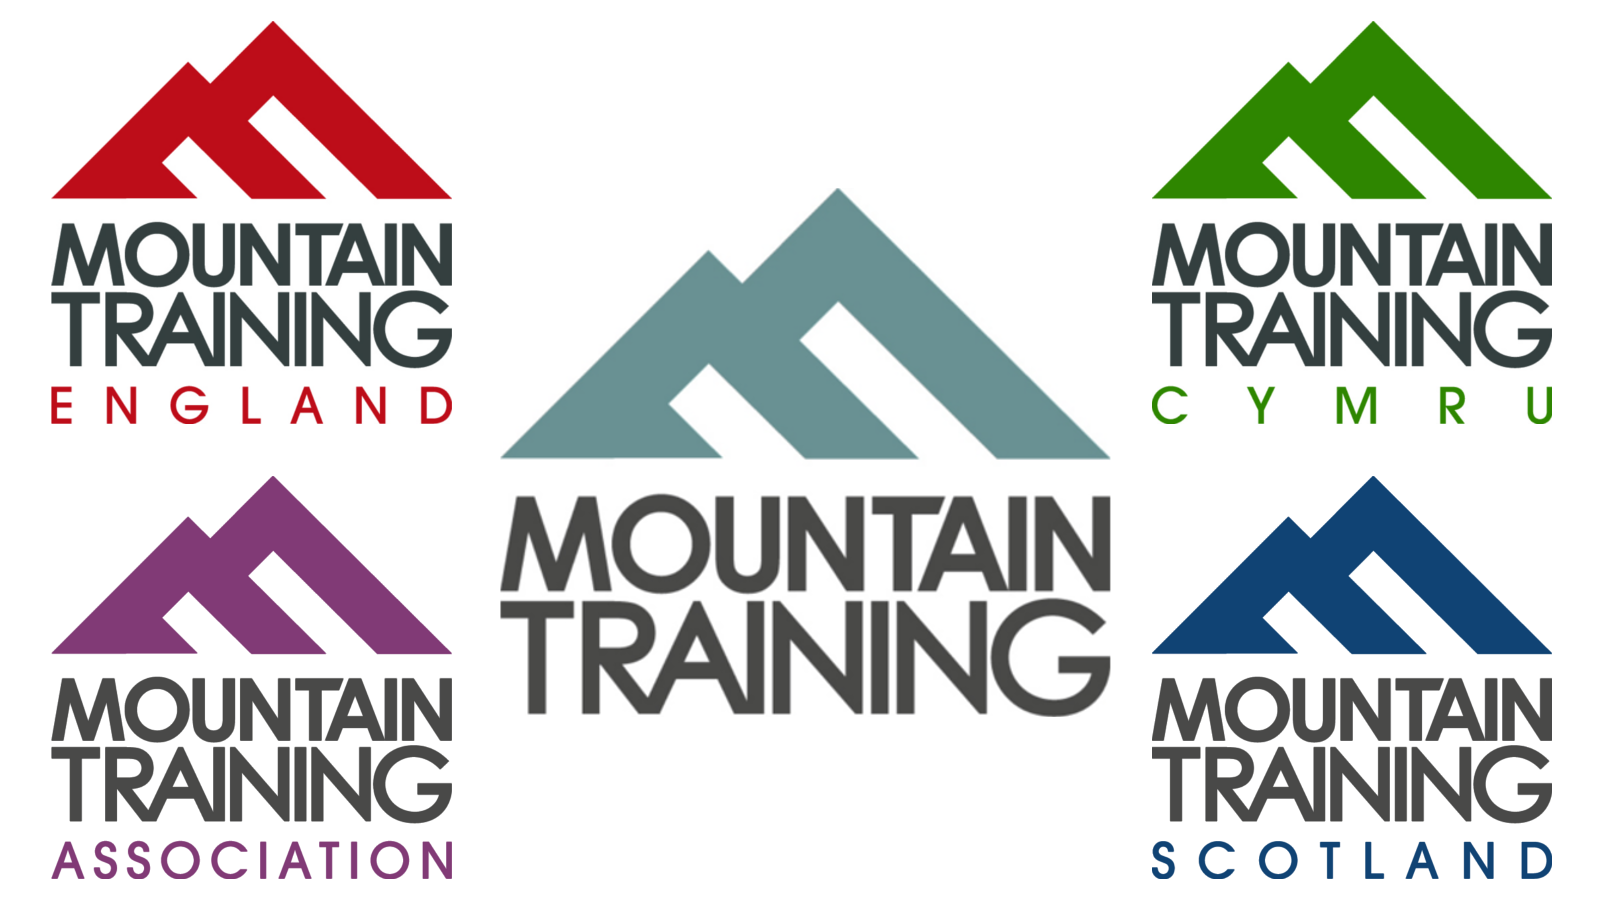 A collage depicting the Main Logos of the Mountain Training Home Boards and the Mountain Training Association. Mountain Training UK are missing as I couldn